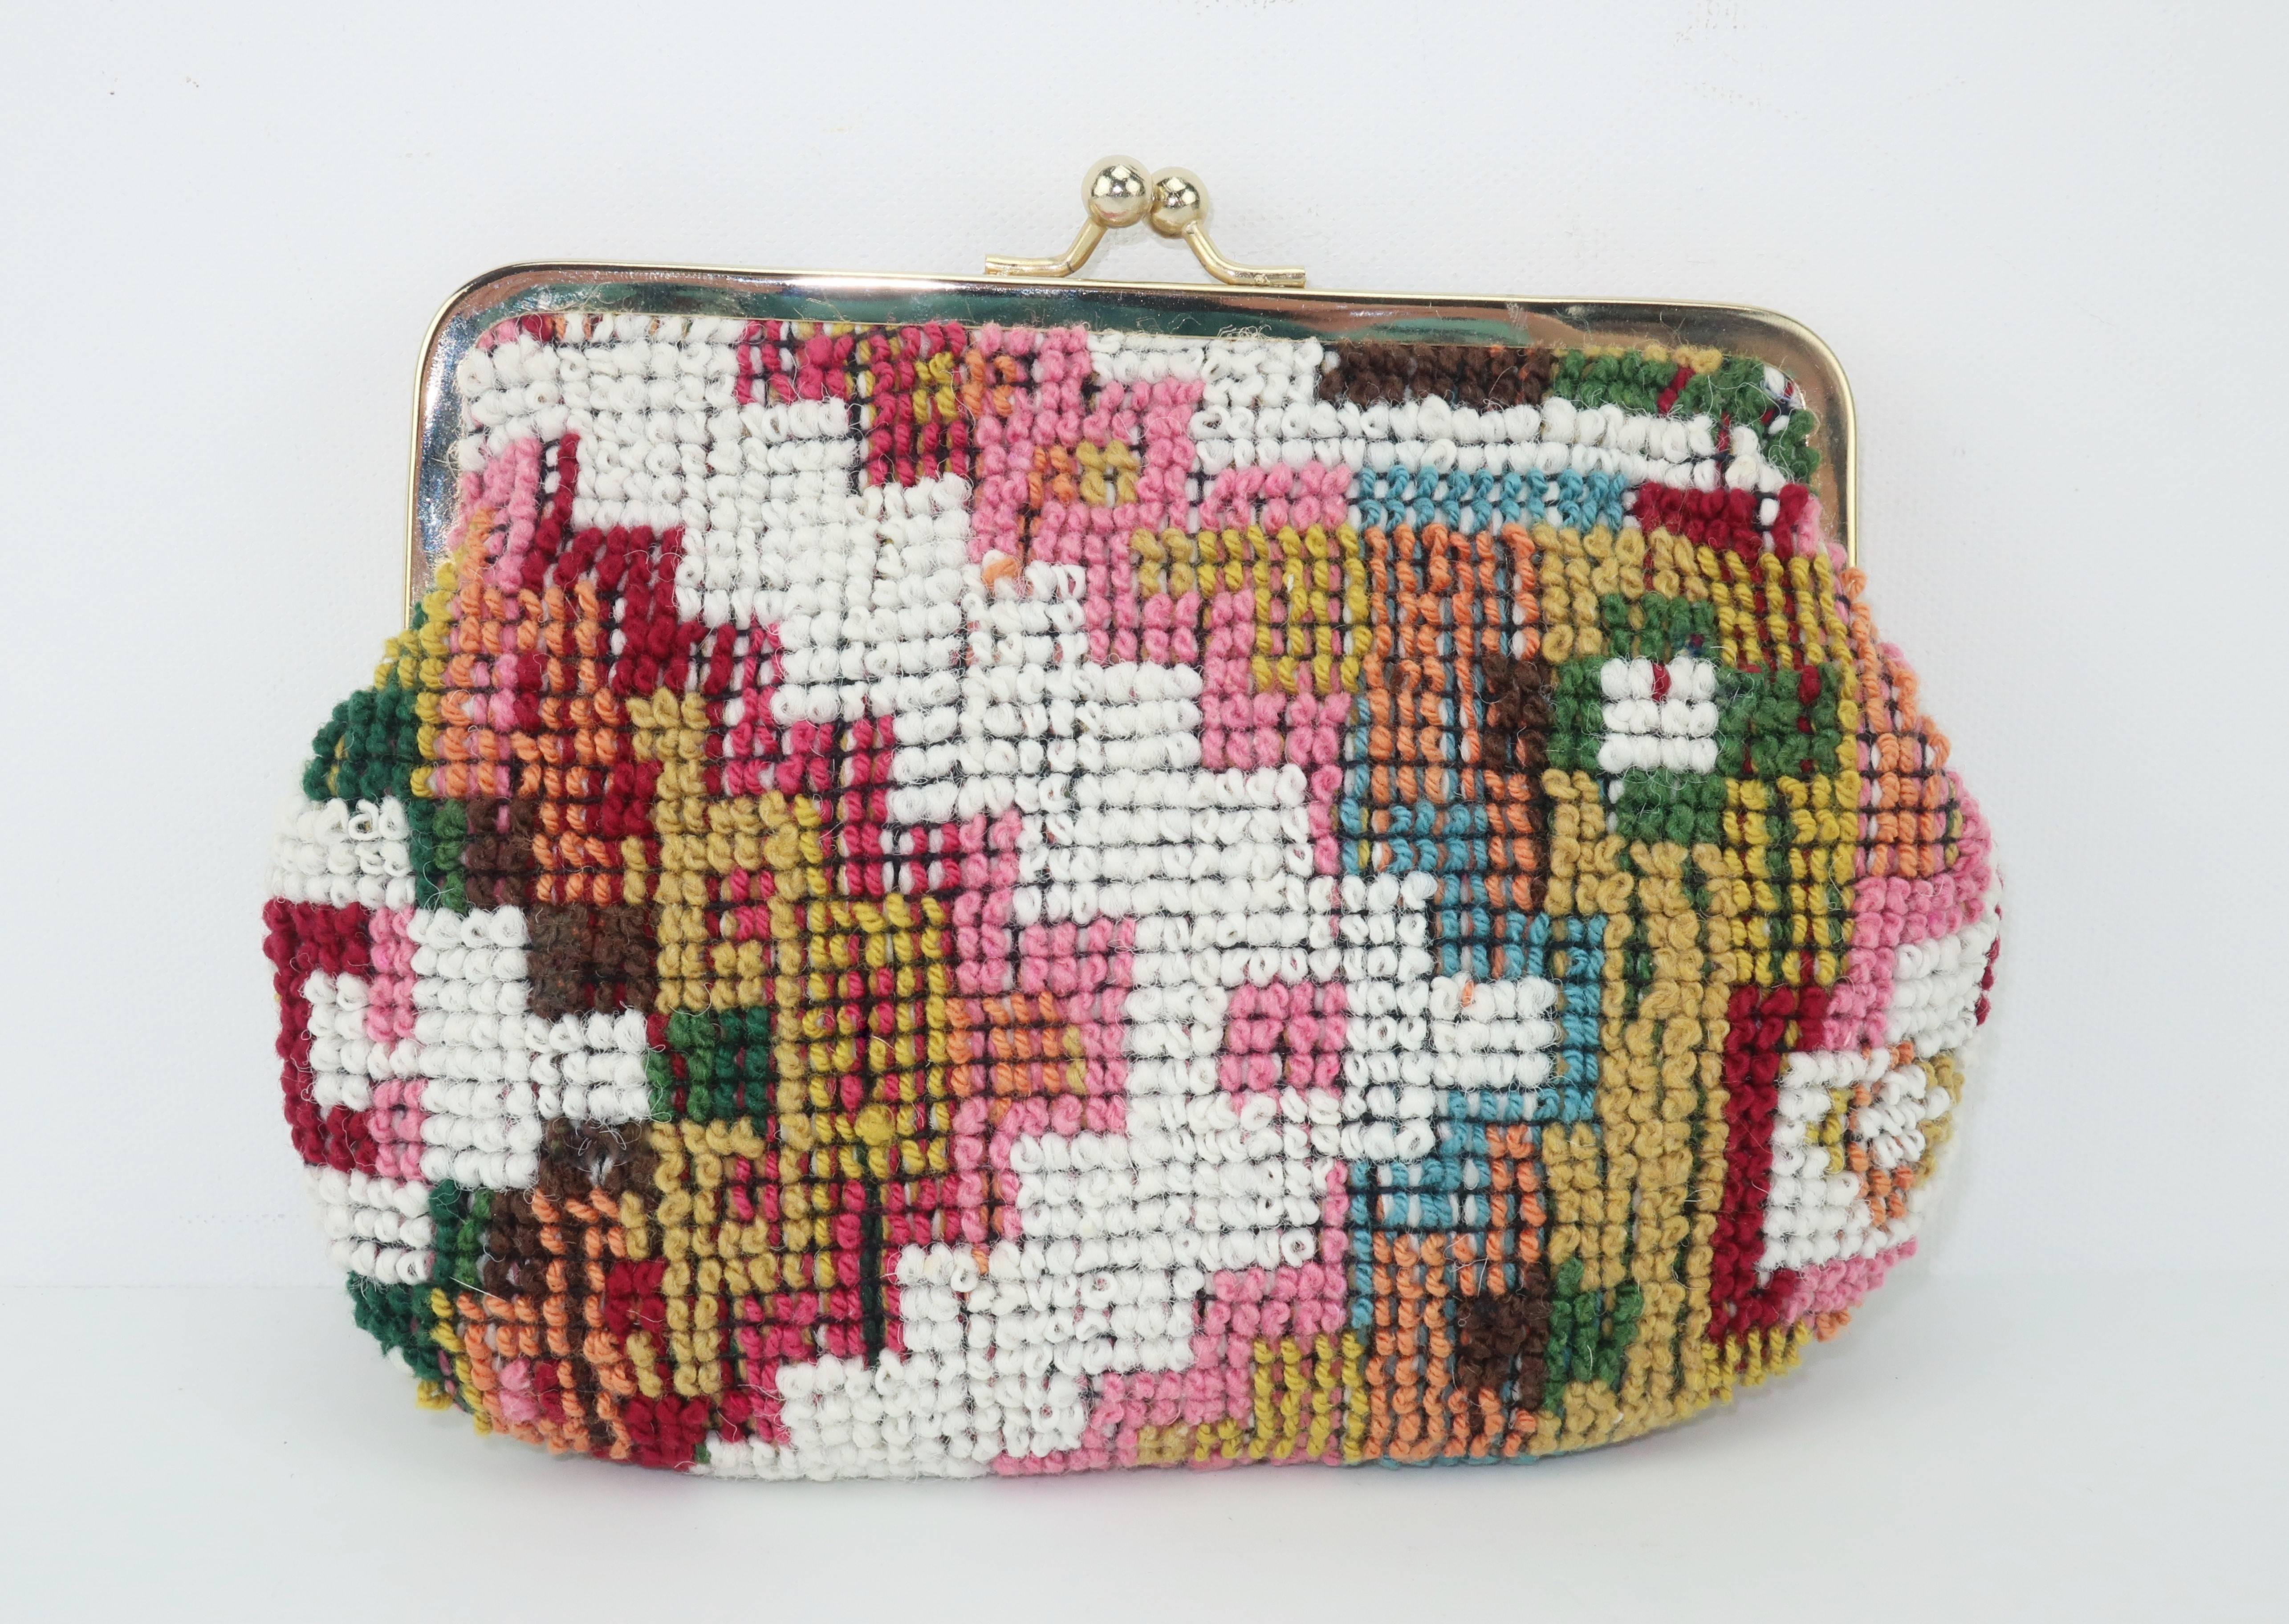 Carry your cosmetics in carpetbag style with this colorful Italian make-up bag in textural looped fabric.  The kiss lock closure opens to reveal a cleanable vinyl lined interior perfect for make-up storage.  The carpetbag design is reminiscent of a